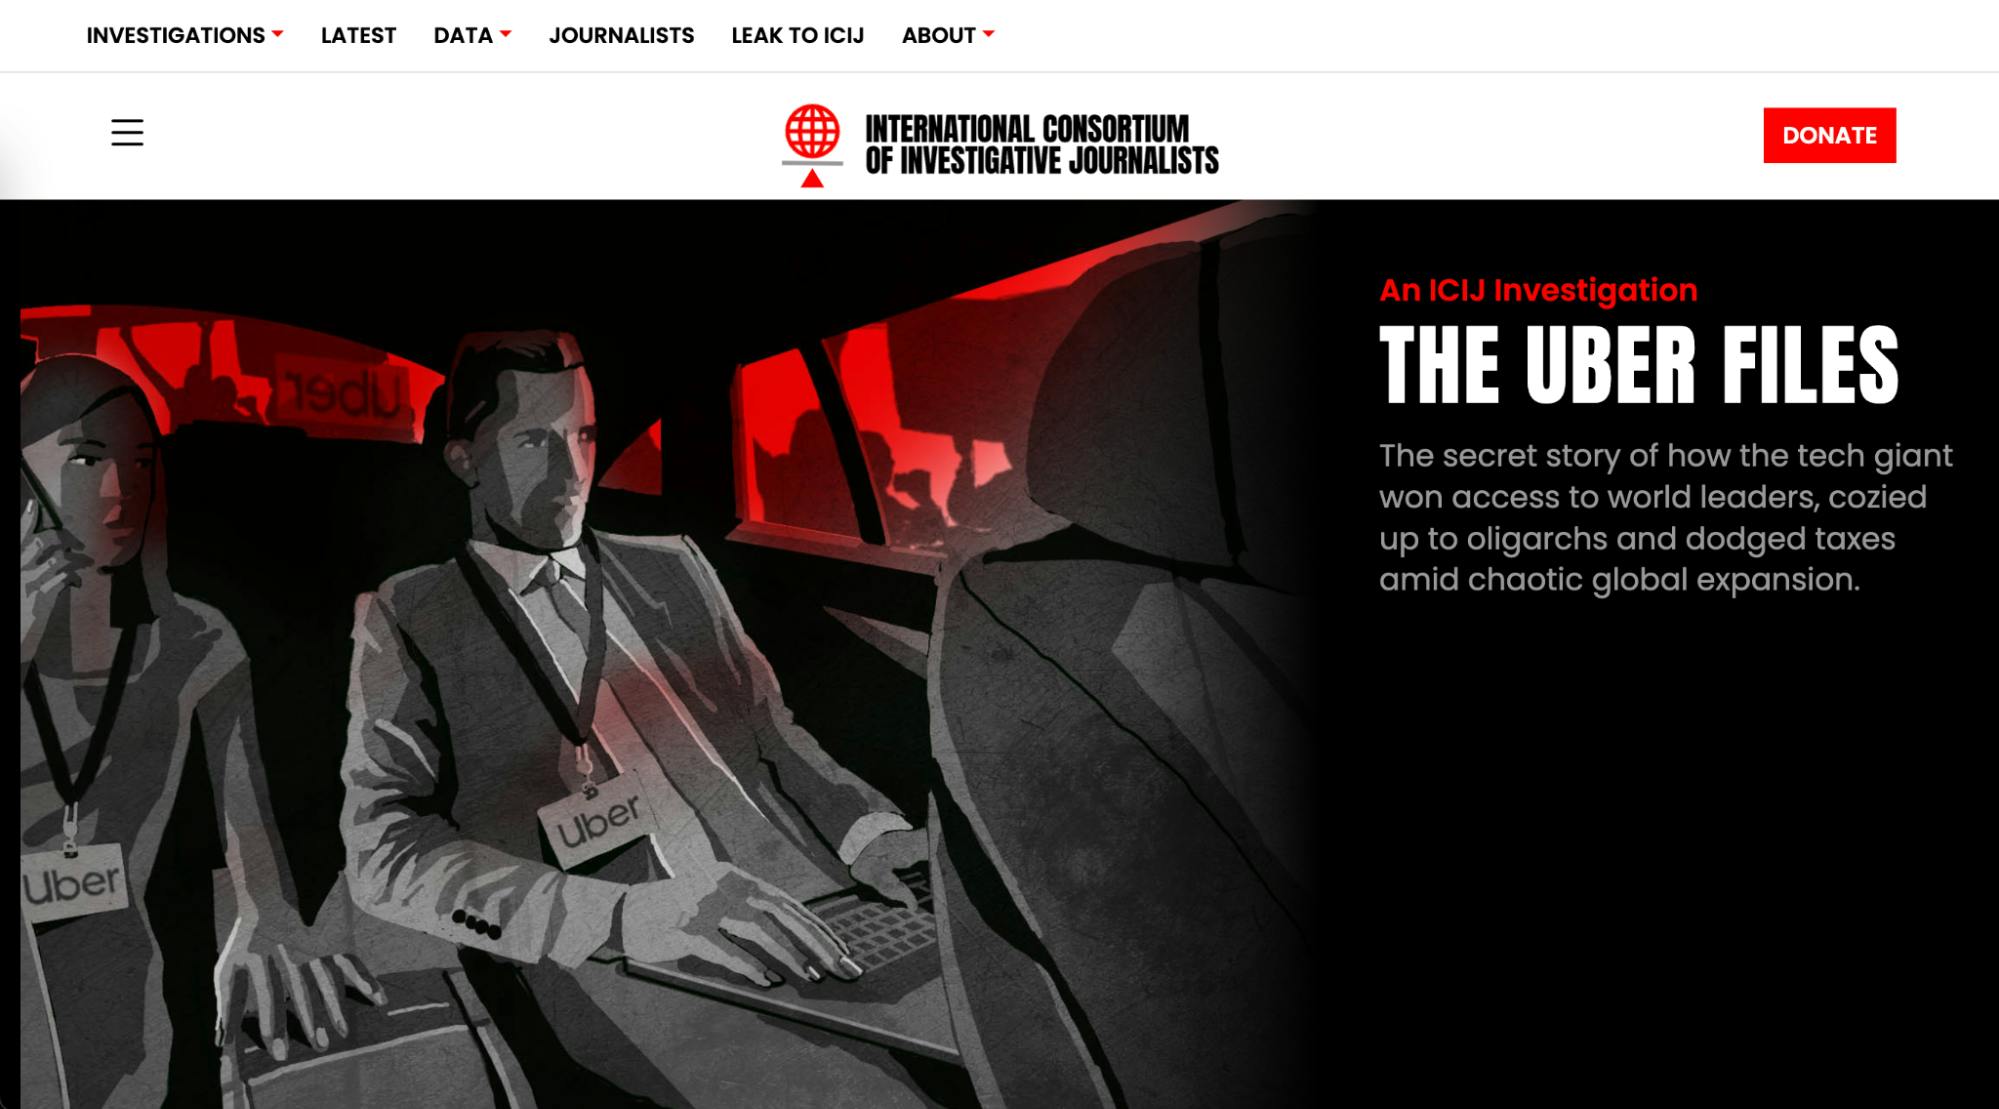 ICIJ website featuring red and the black and white monochrome scheme